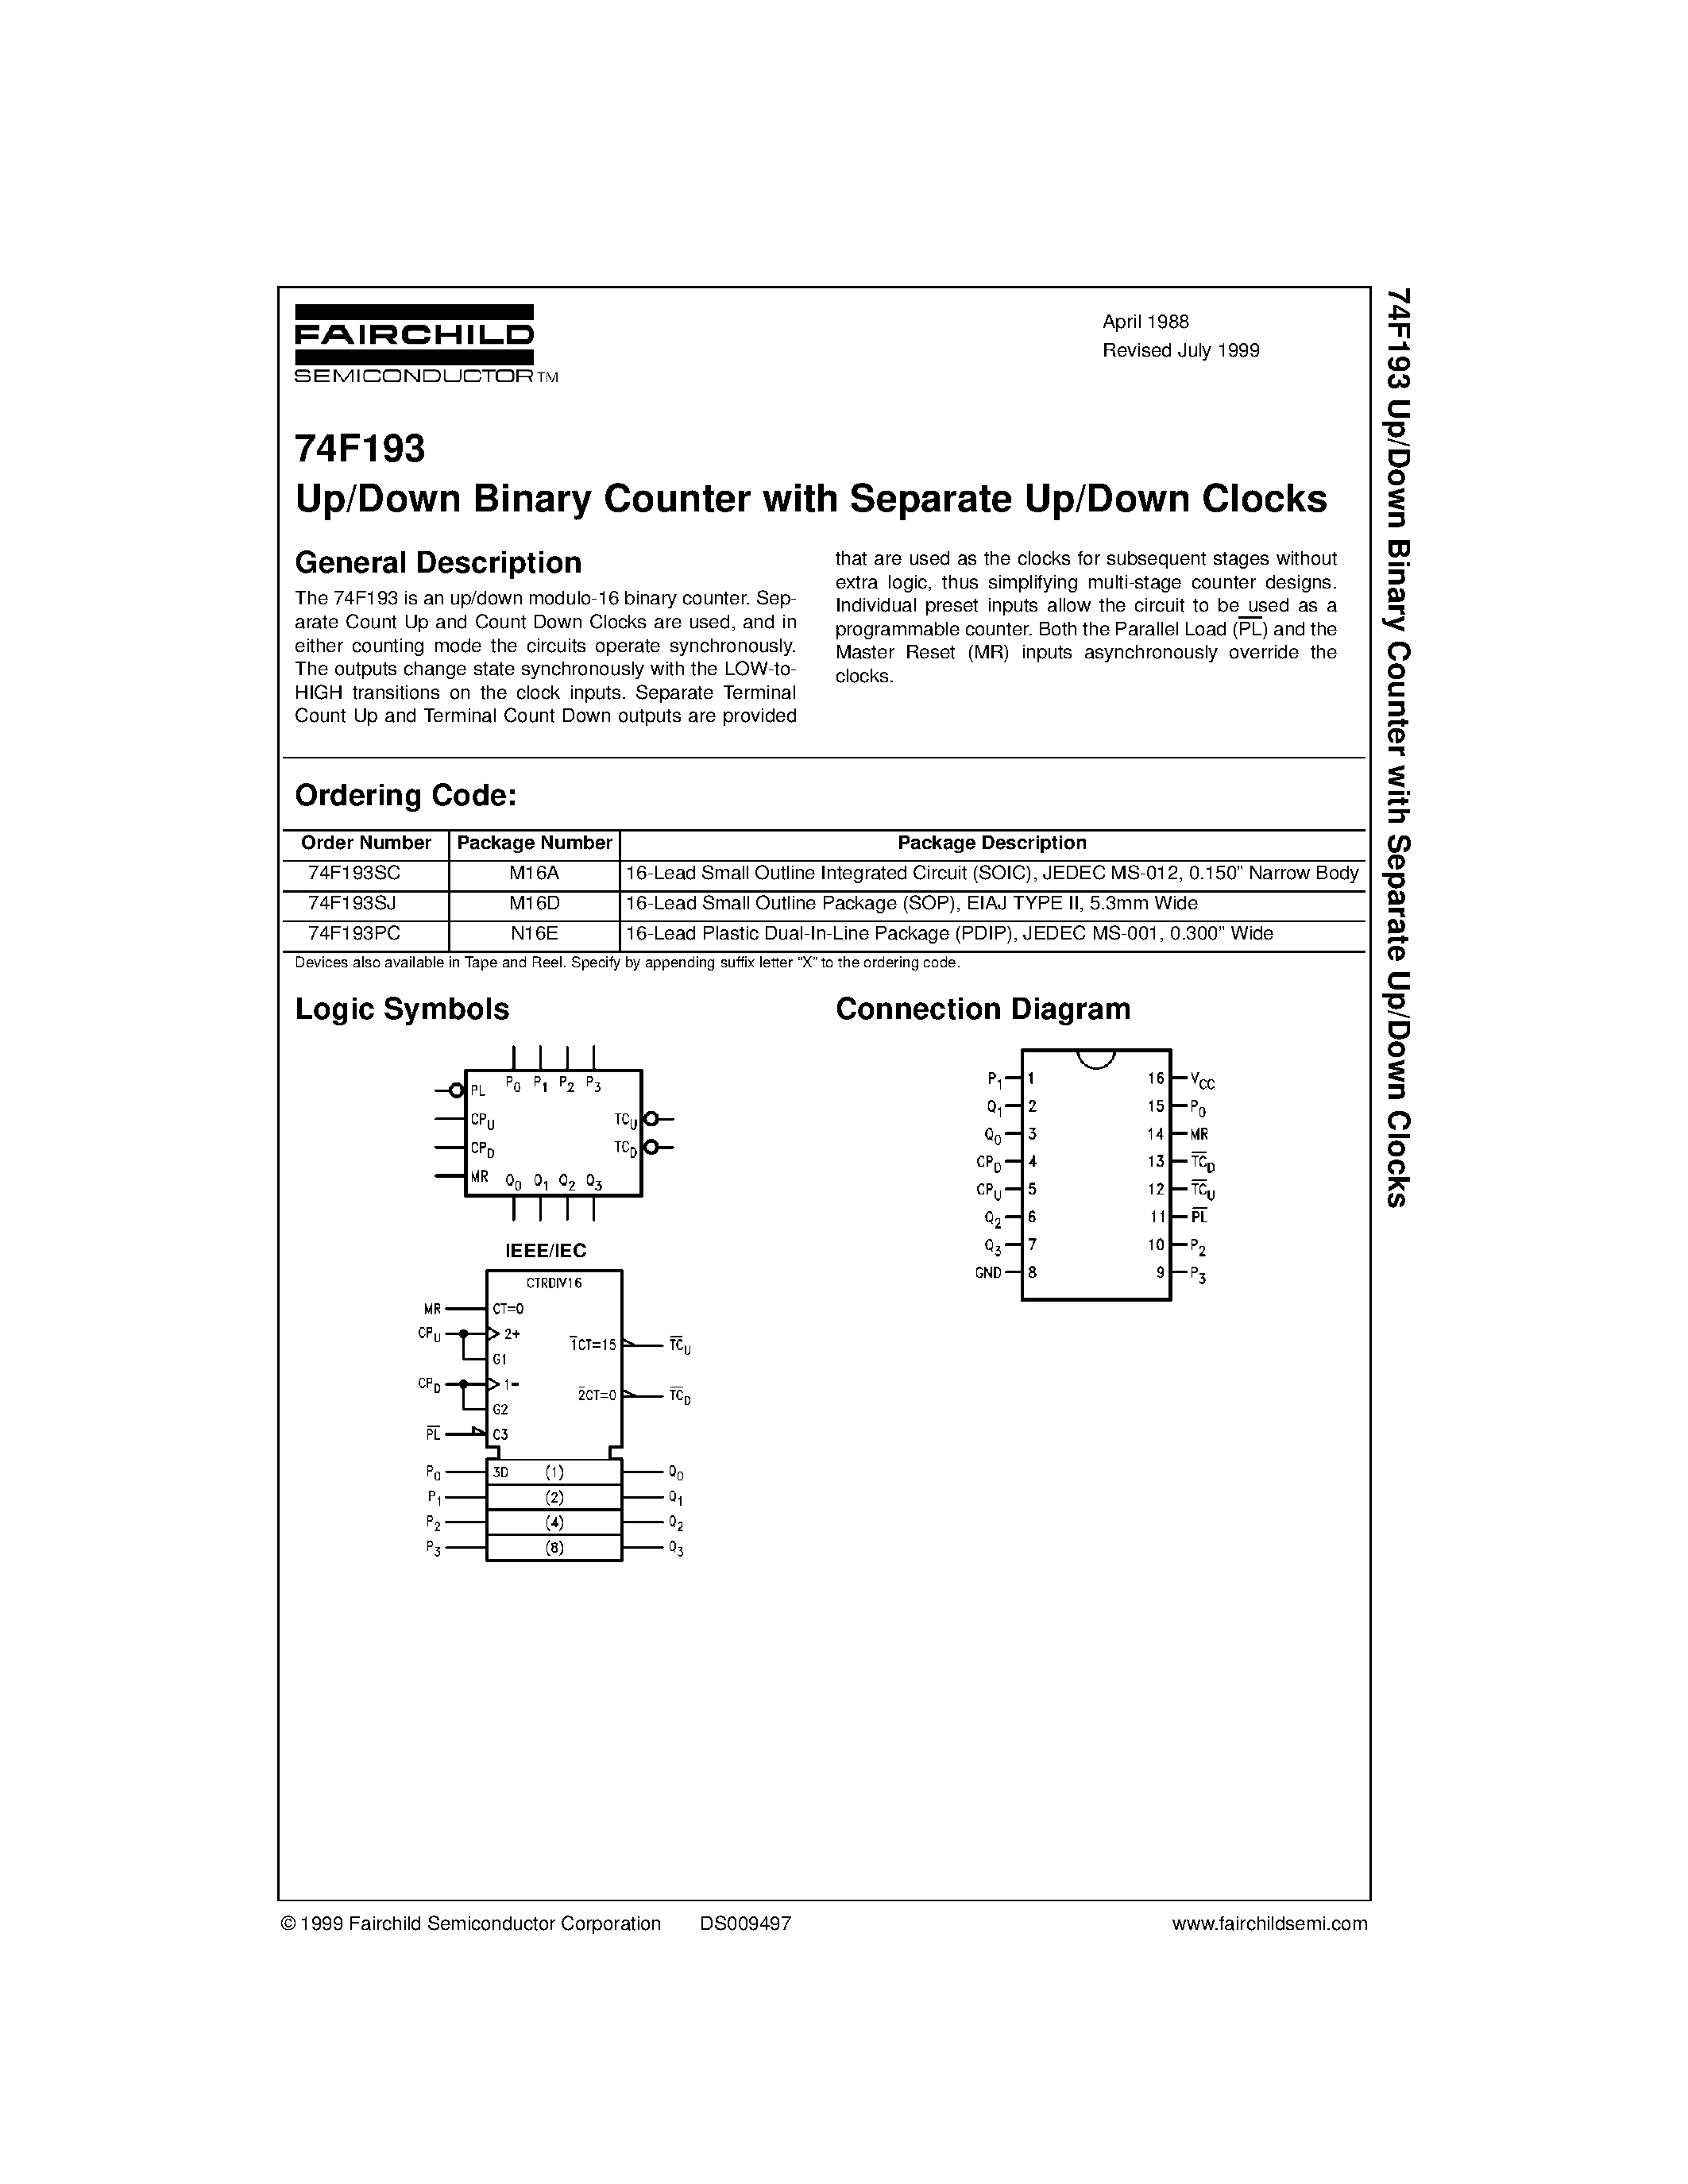 Datasheet 74F193SC - Up/Down Binary Counter with Separate Up/Down Clocks page 1